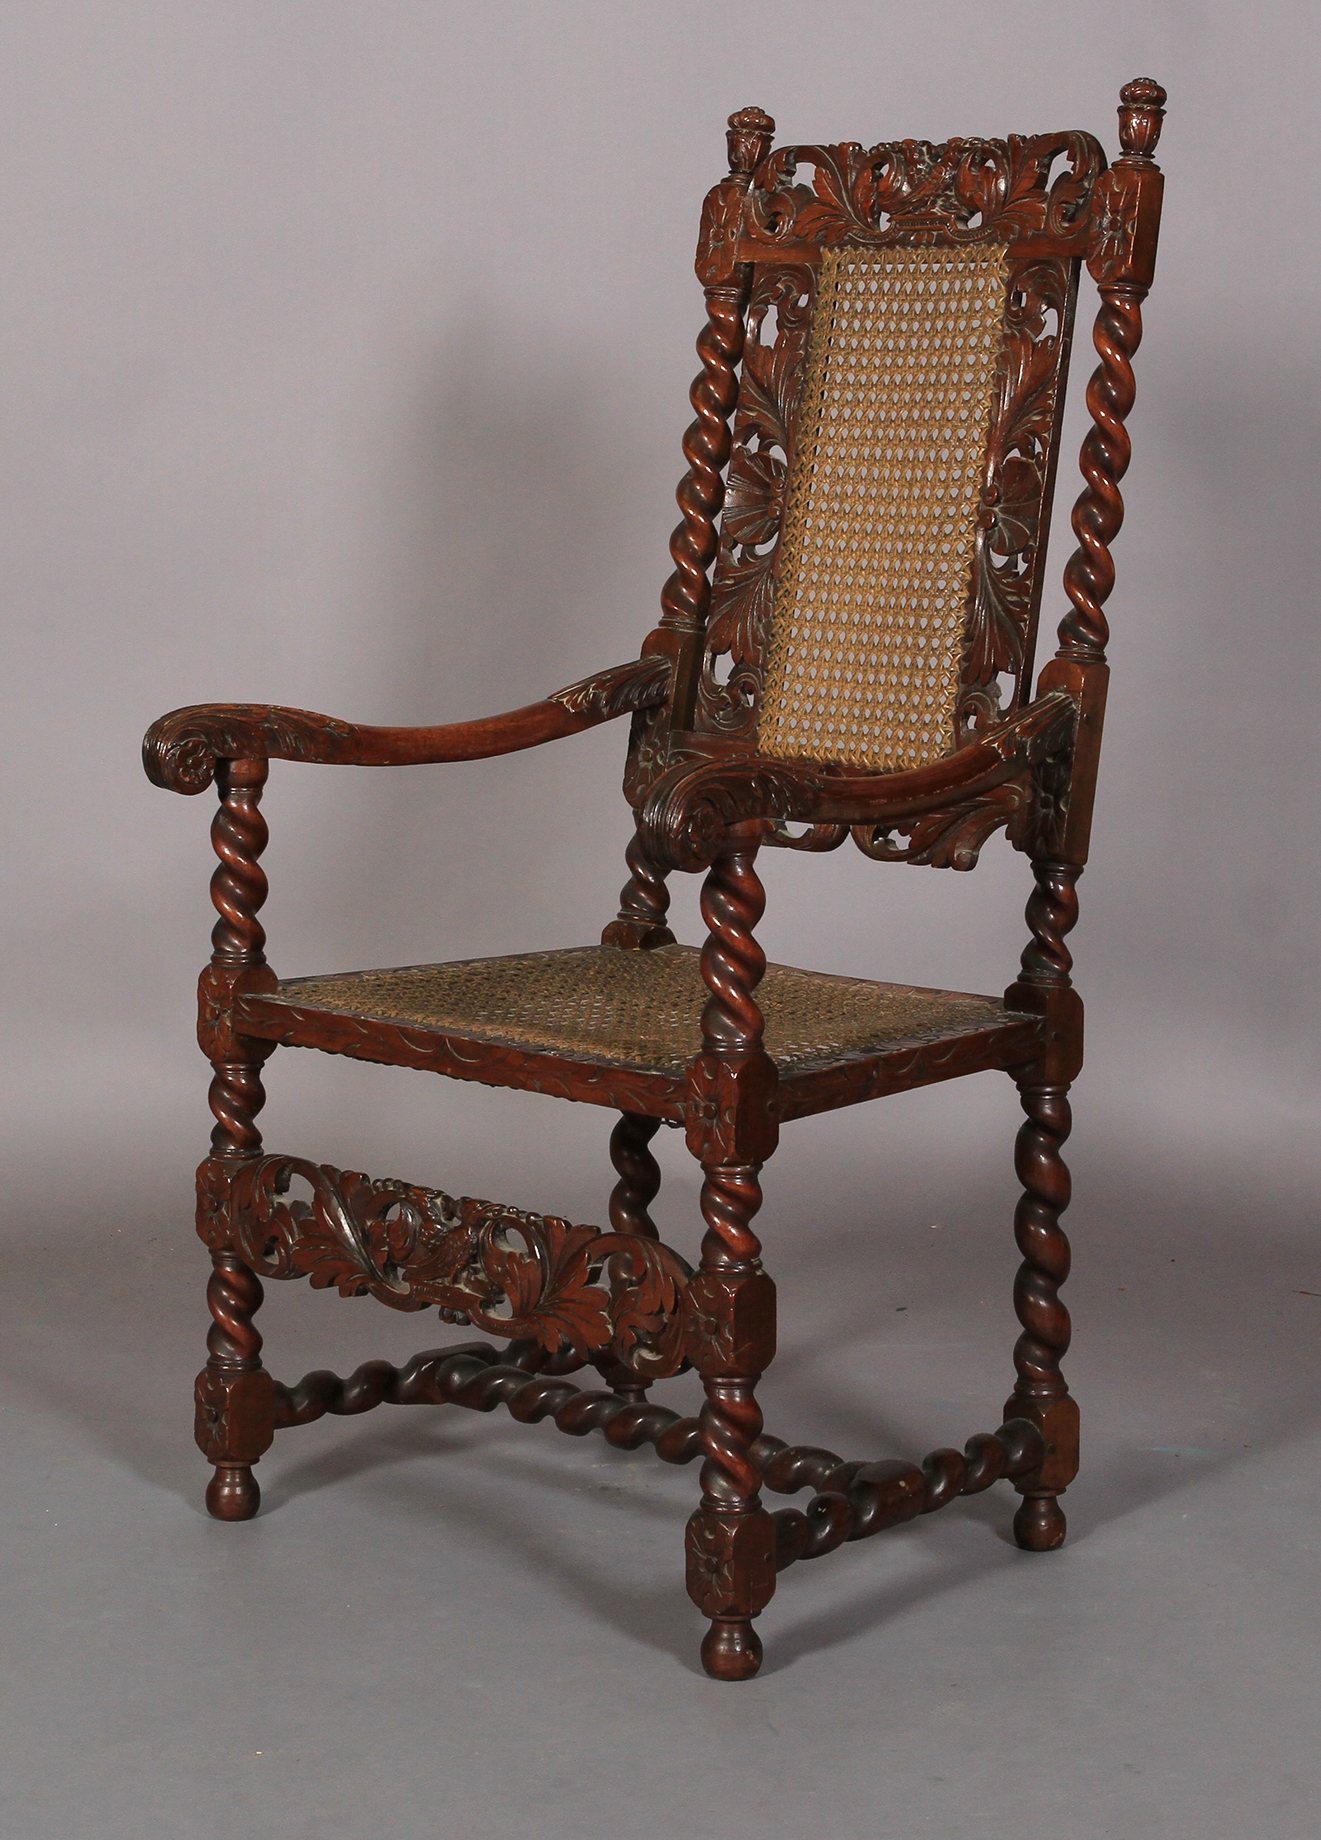 A Charles II style walnut armchair 19th century, having a pierced cresting carved with pair of birds